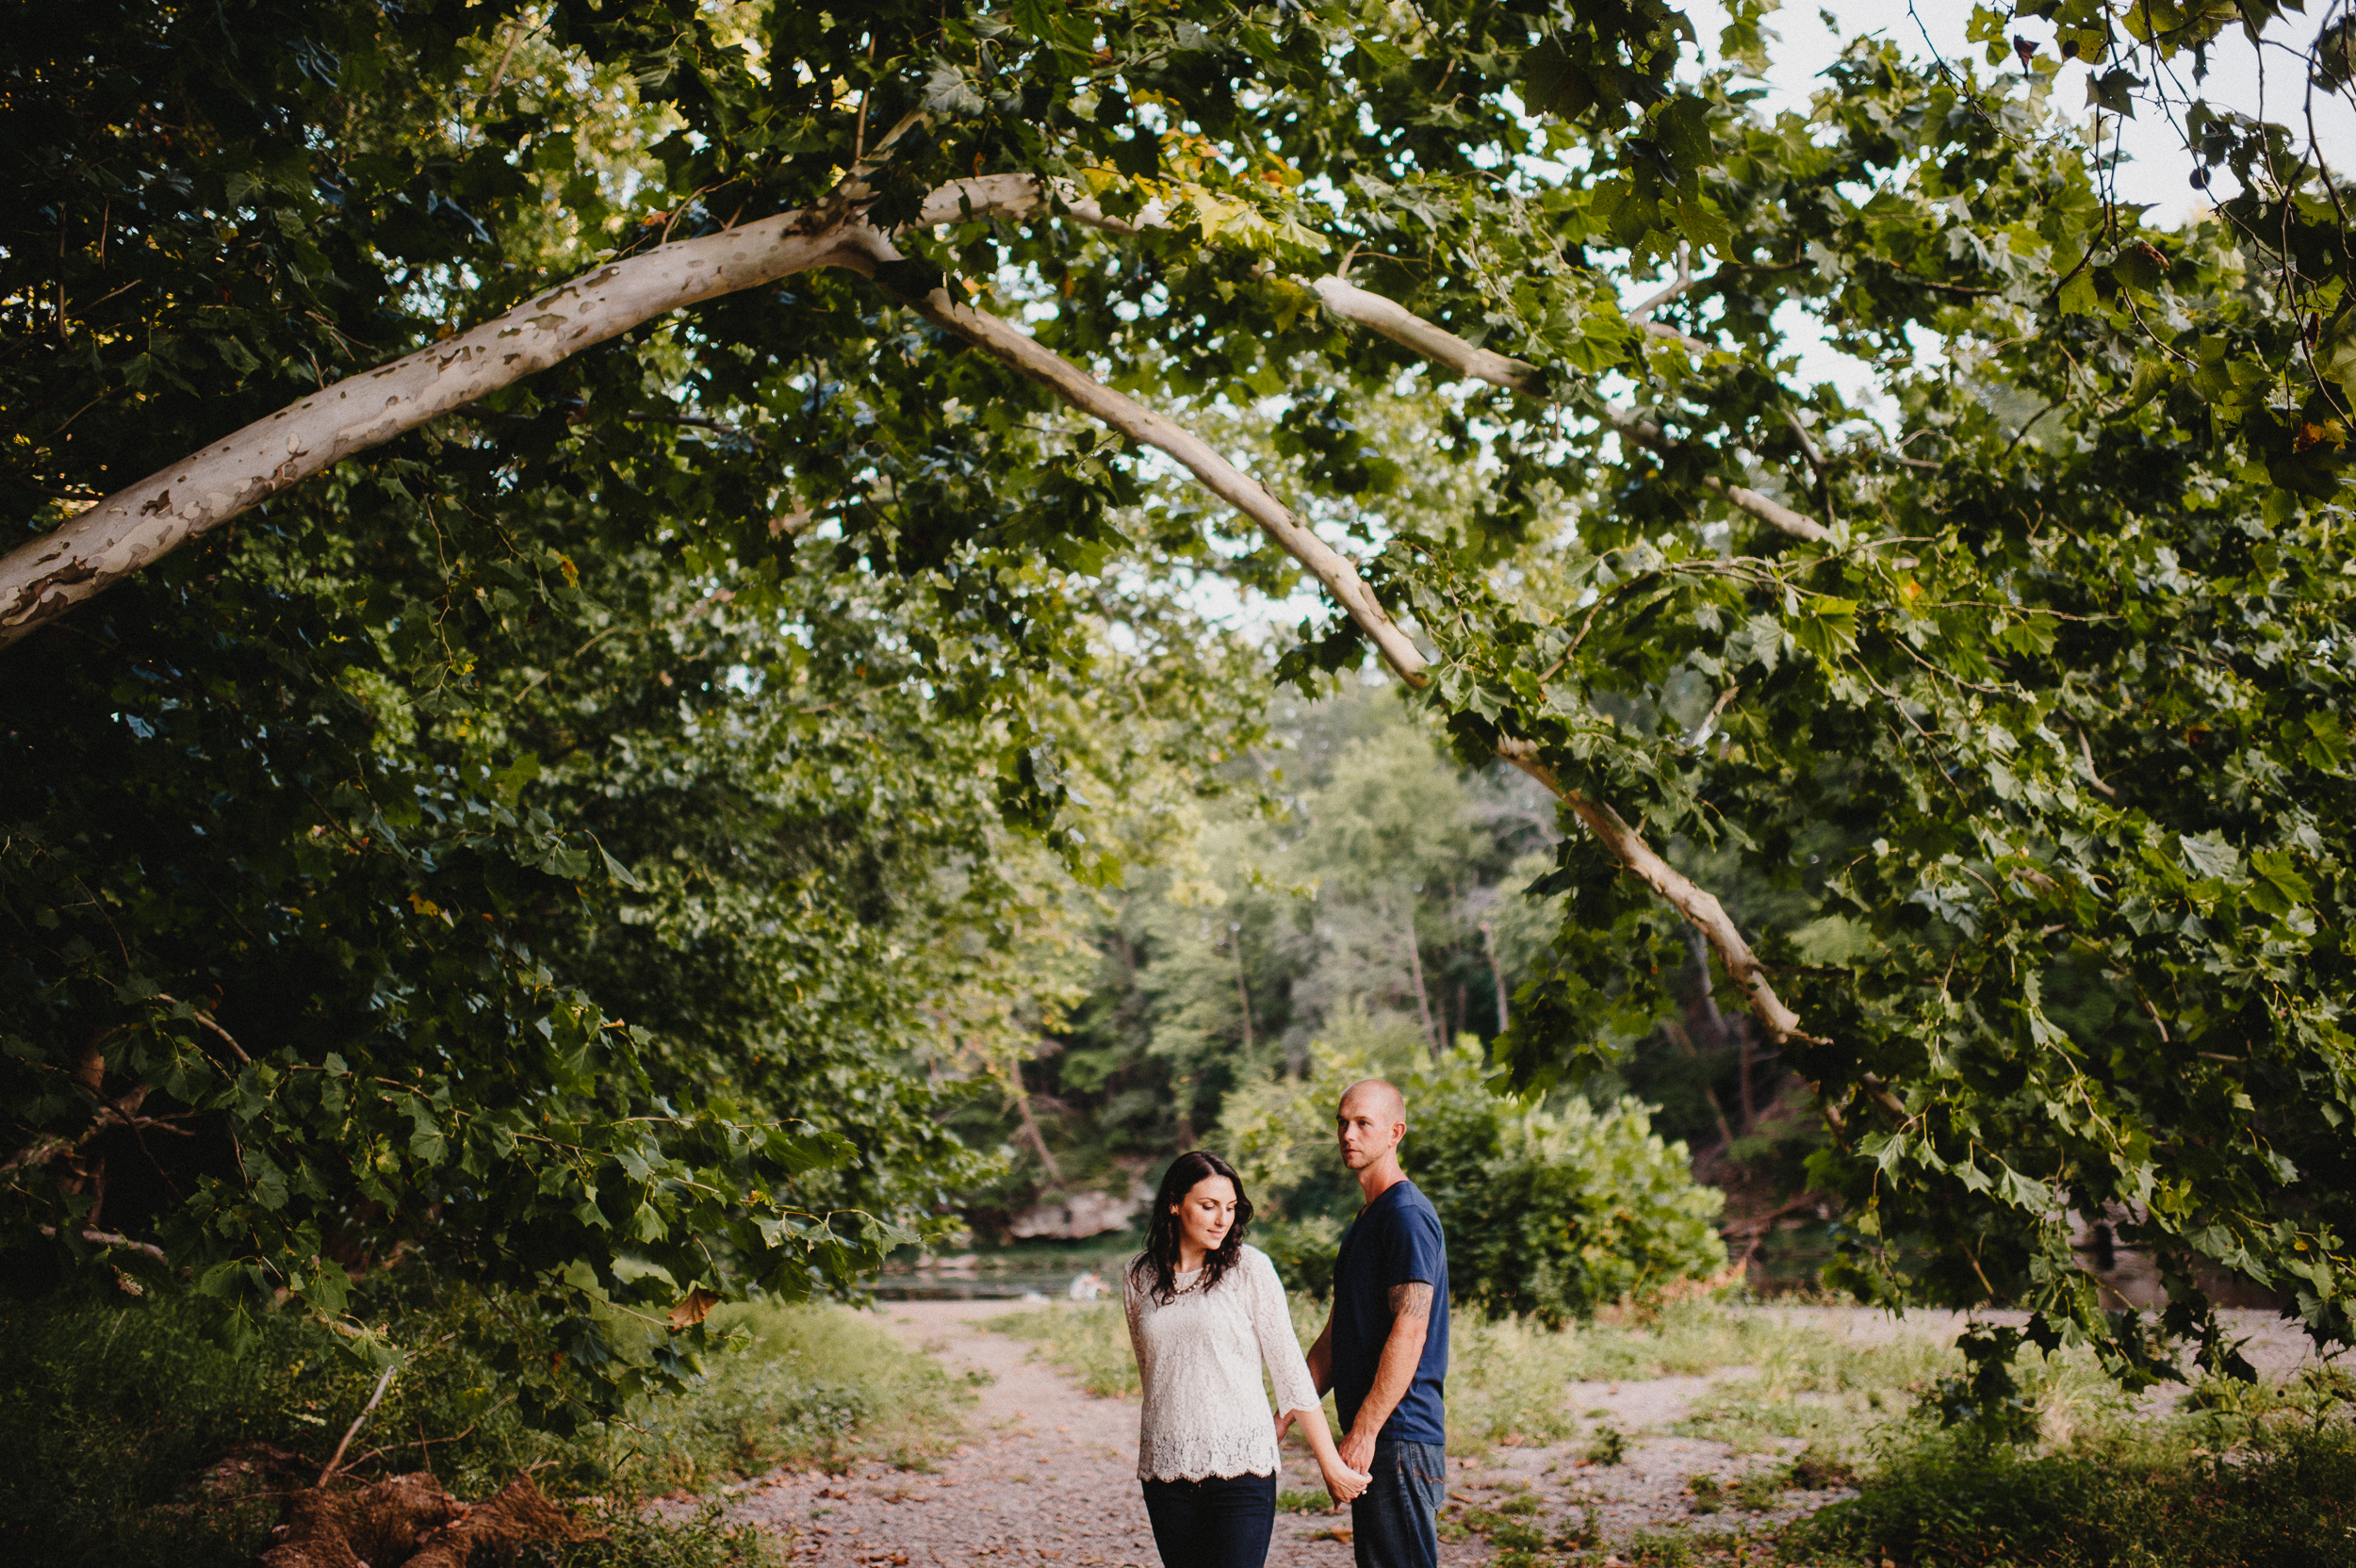 pat-robinson-photography-pa-engagement-session-13.jpg